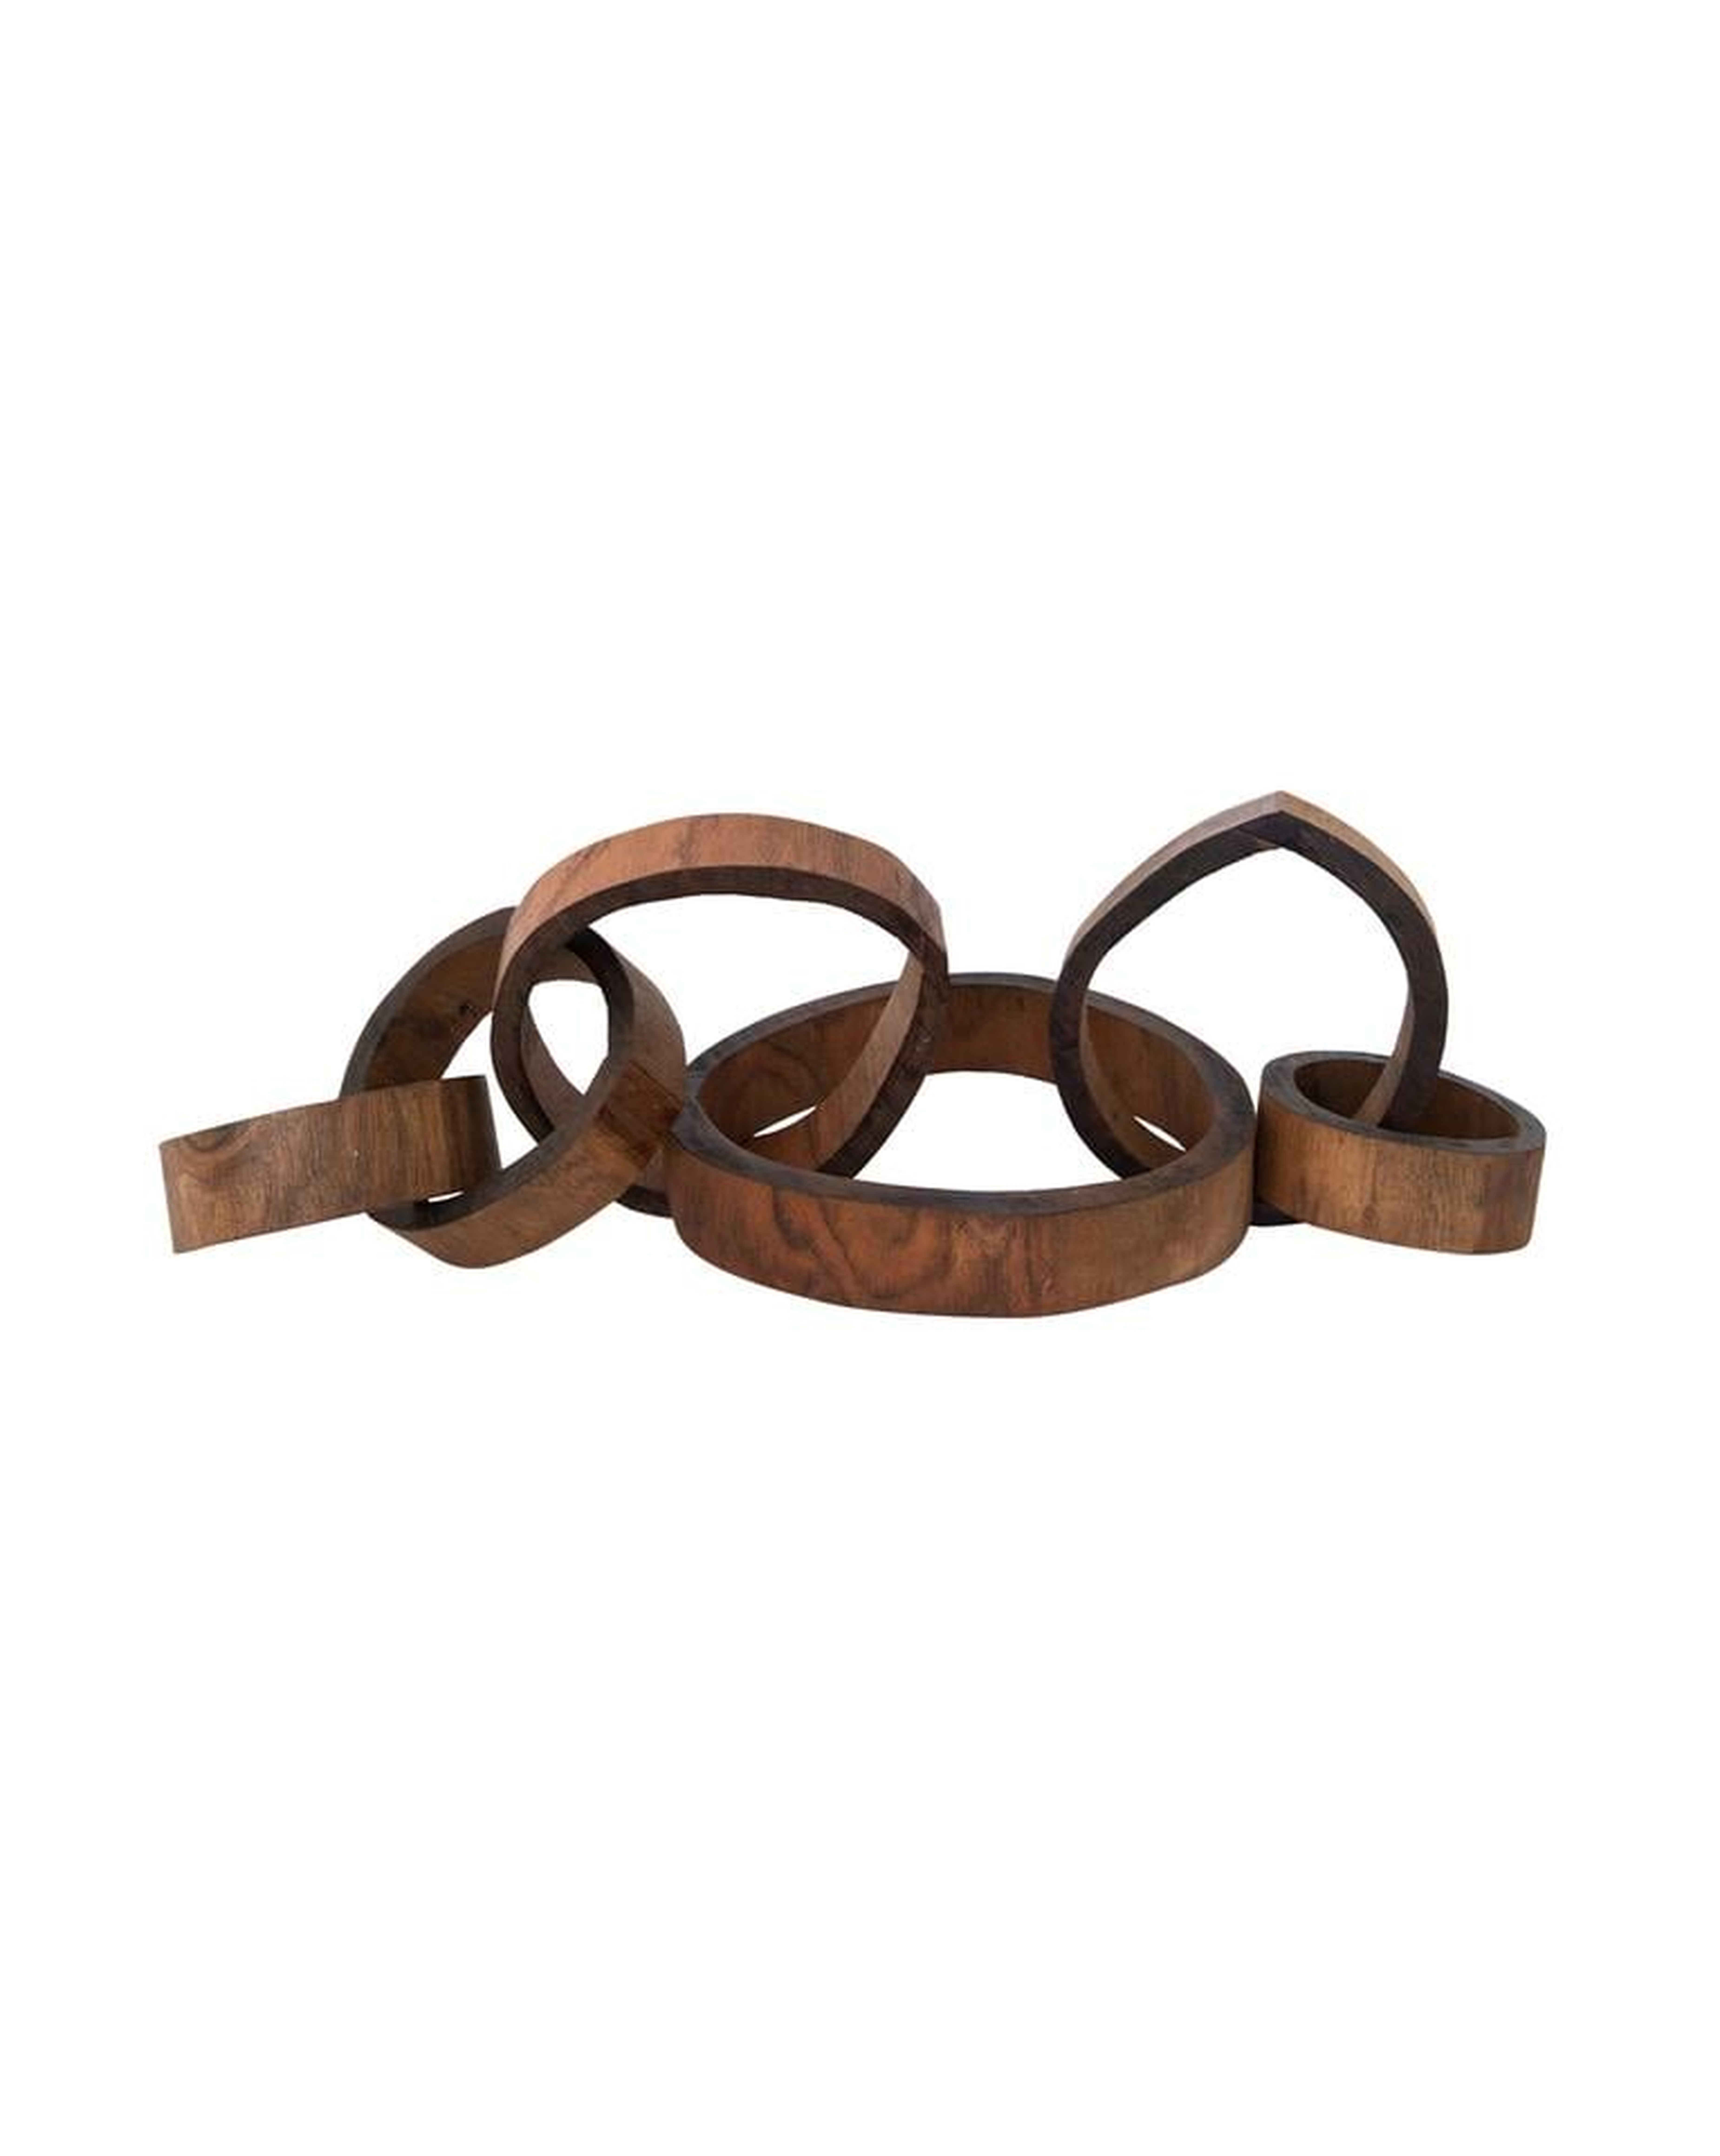 LINKED WOOD OBJECT - McGee & Co.